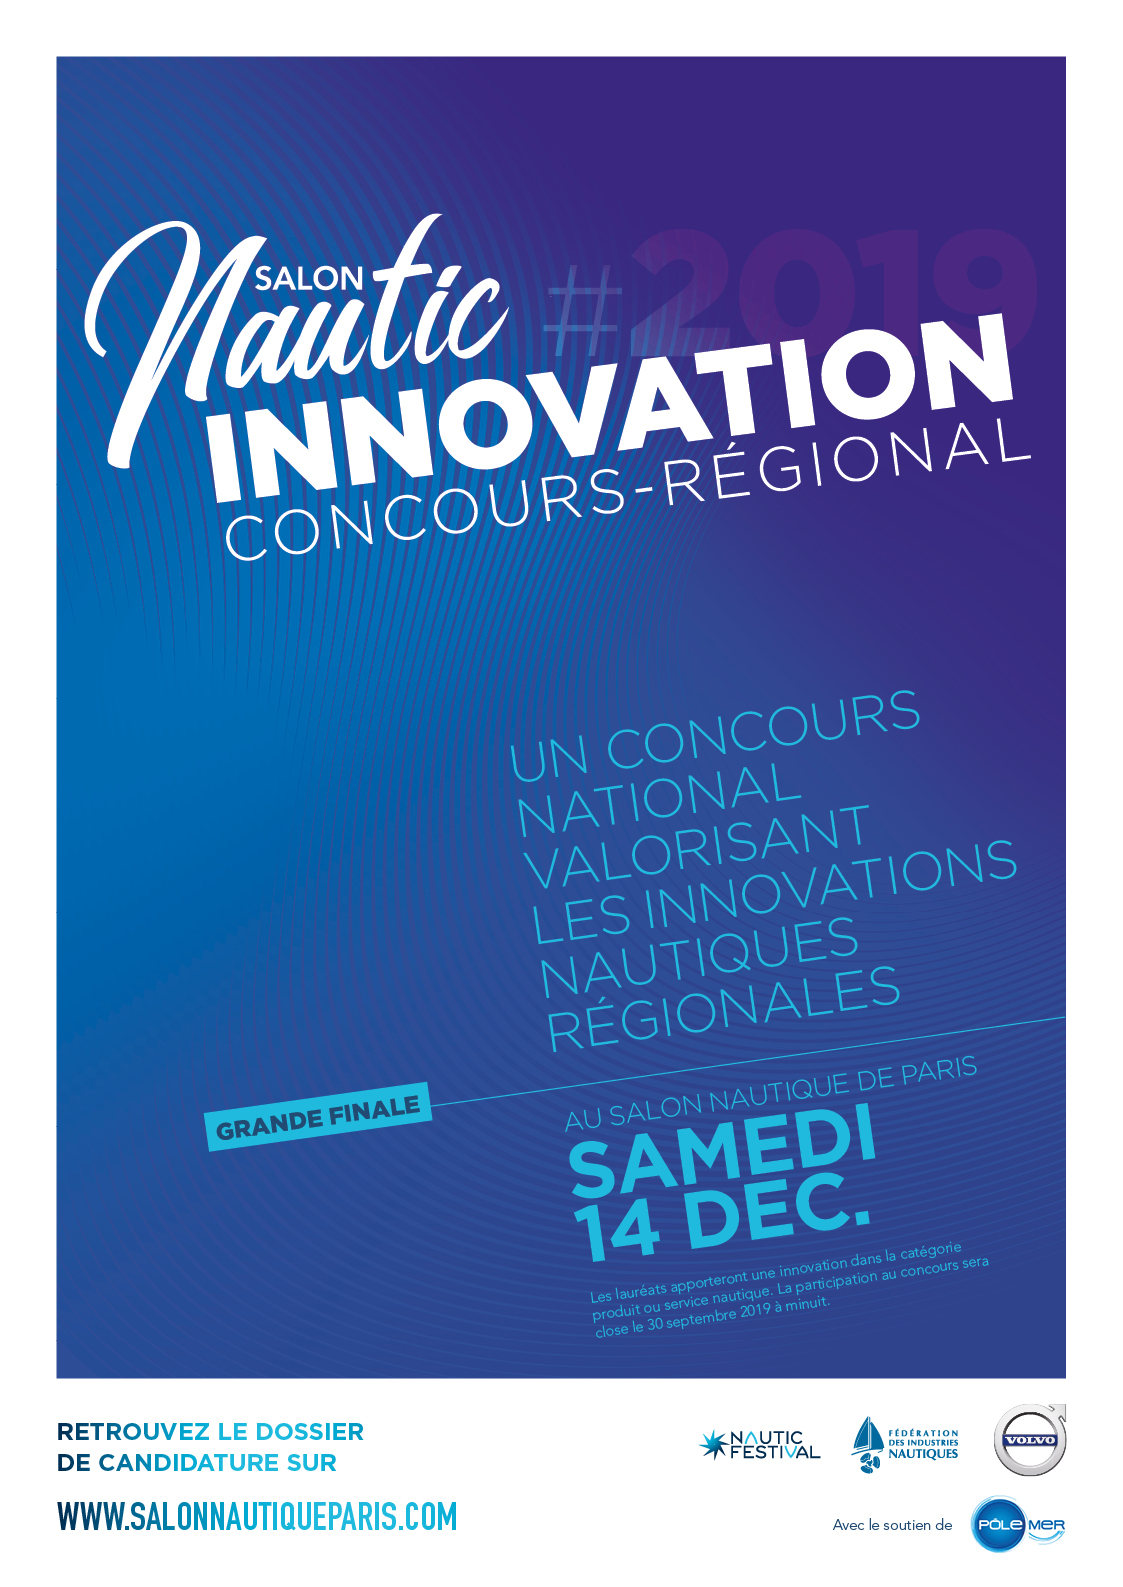 nautic 2019 : concours innovation